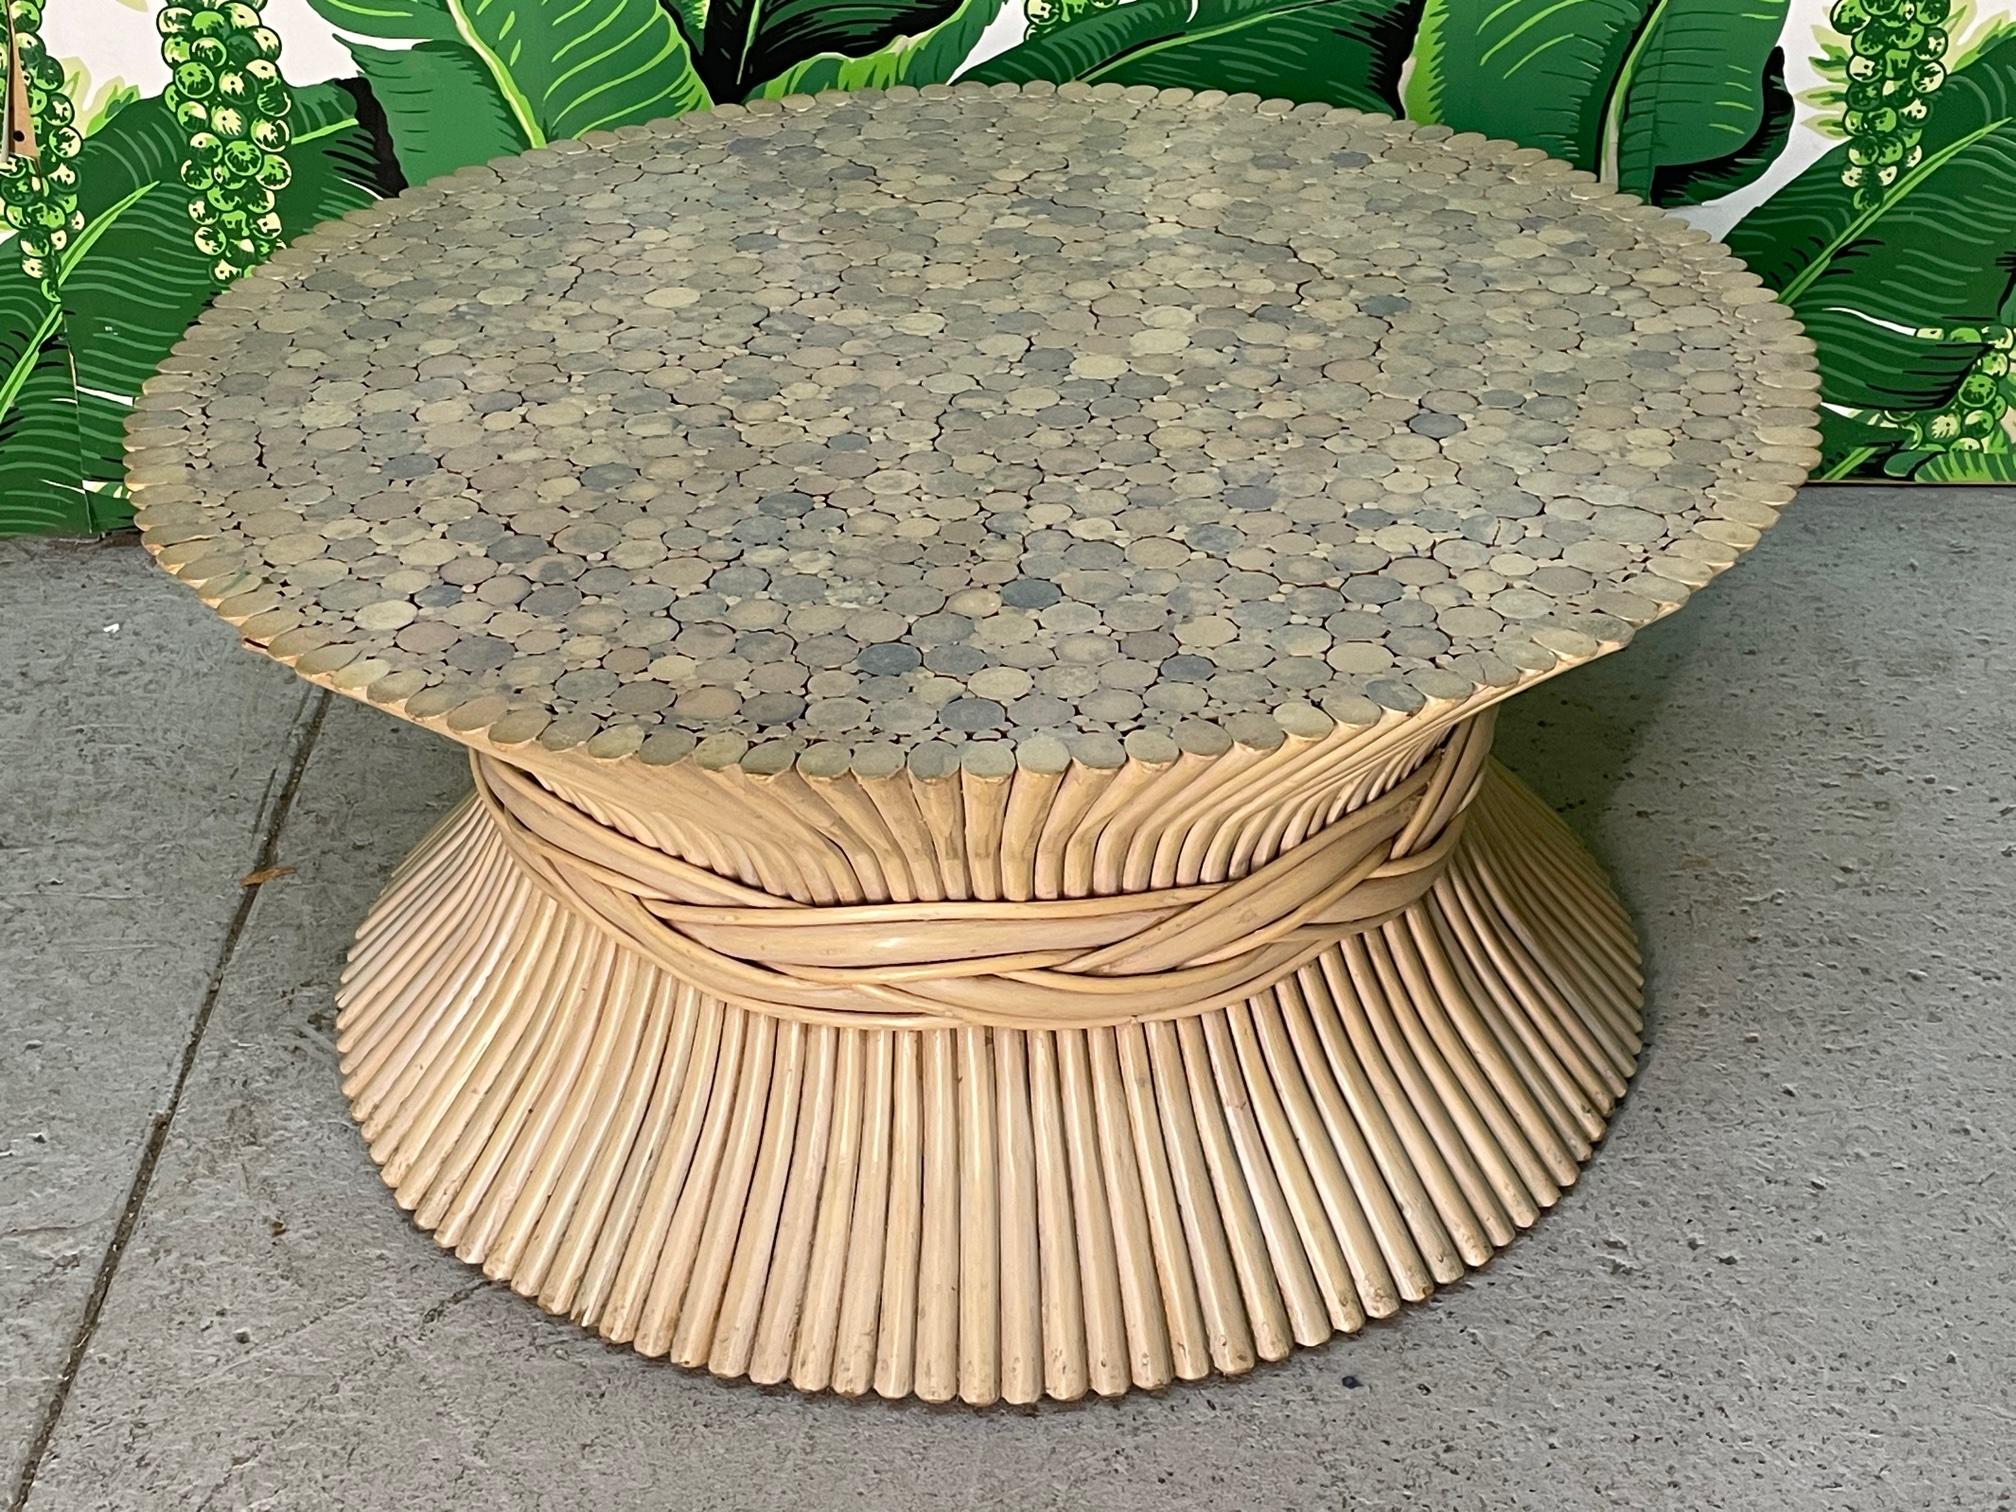 Rattan coffee or cocktail table in the iconic sheaf of wheat motif in the manner of McGuire. Good condition with minor imperfections consistent with age.